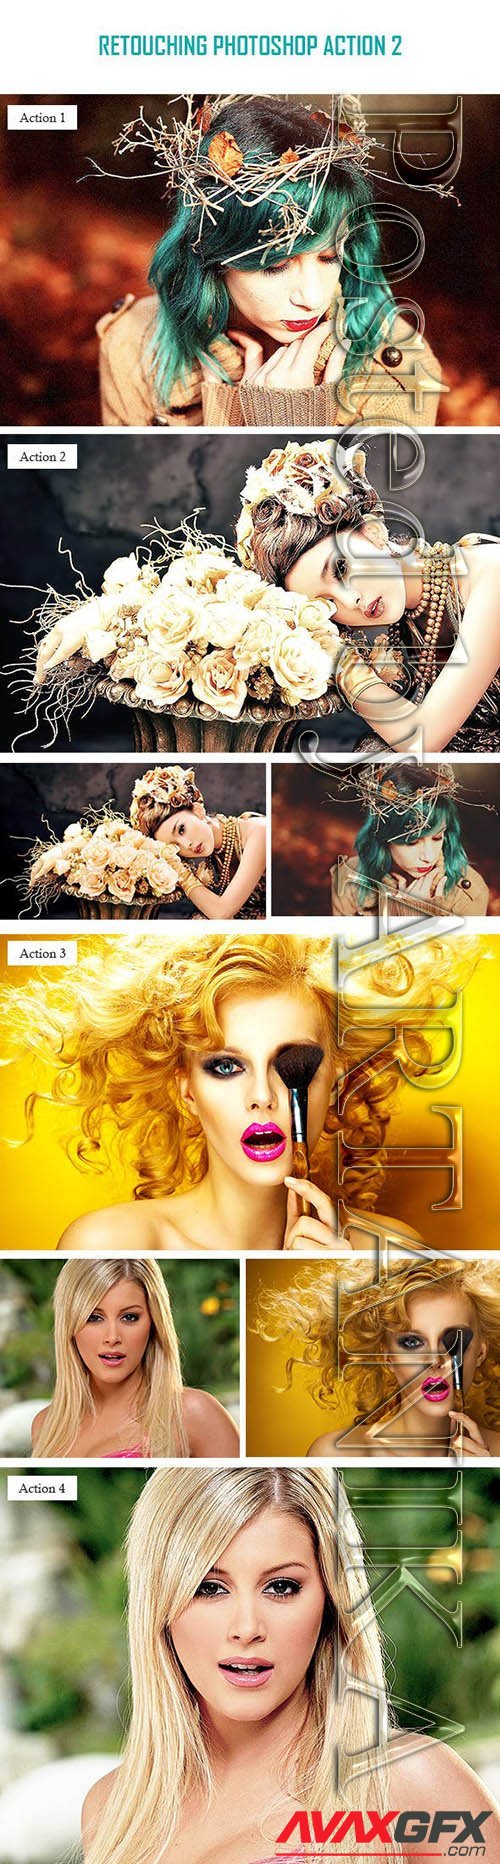 Graphicriver - Retouching Photoshop Action 2 10515610